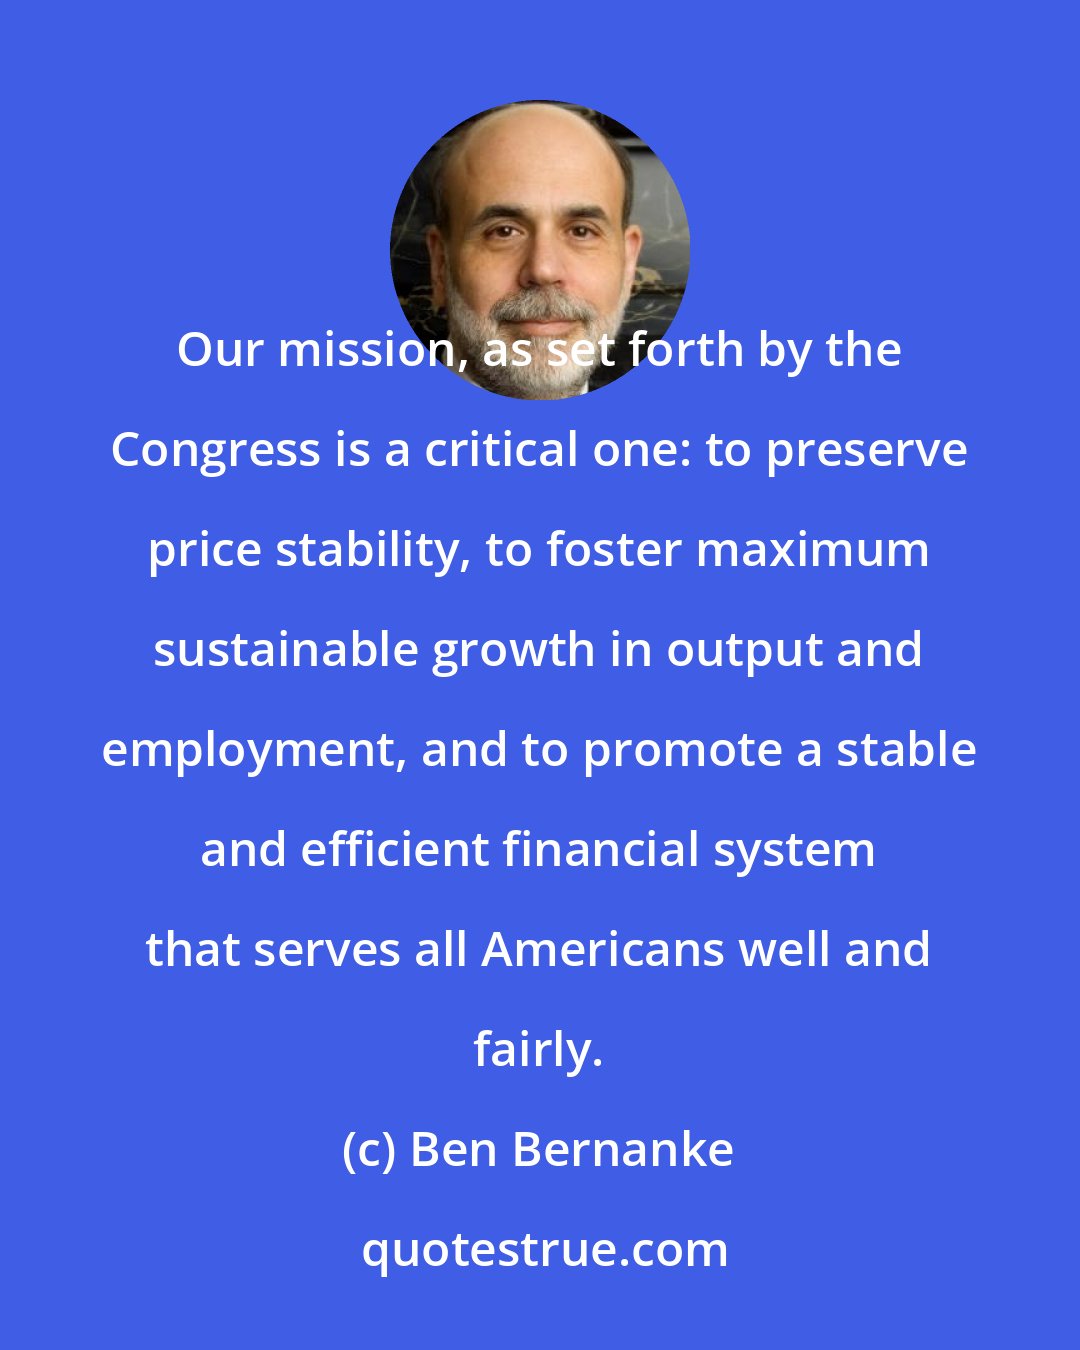 Ben Bernanke: Our mission, as set forth by the Congress is a critical one: to preserve price stability, to foster maximum sustainable growth in output and employment, and to promote a stable and efficient financial system that serves all Americans well and fairly.